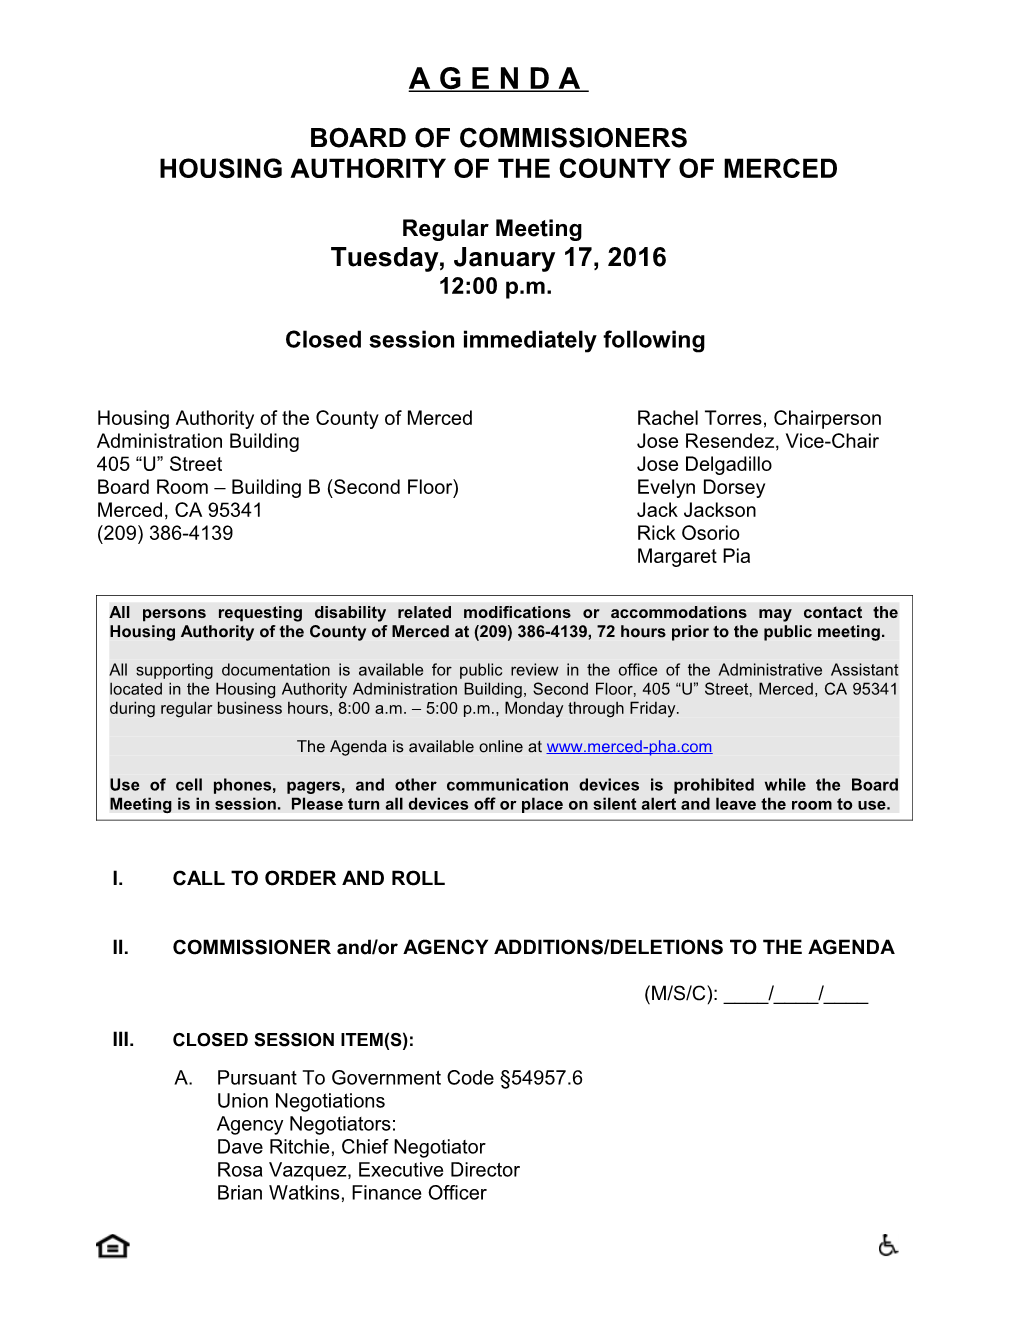 Housing Authority of the County of Merced